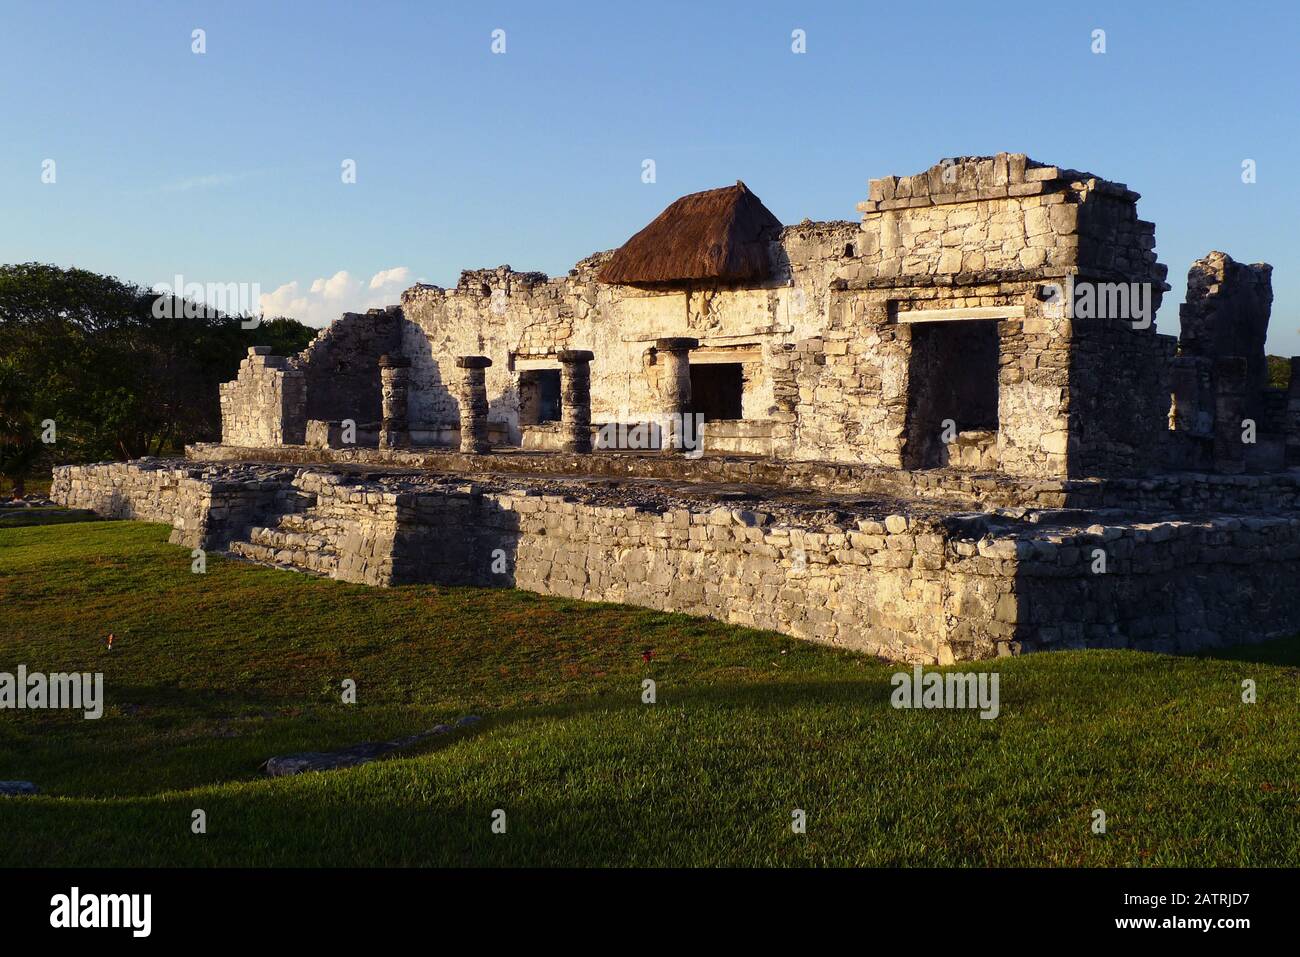 The Mayan Ruins in the Tulum Archeological Zone, Tulum, Quintana Roo, Mexico.  These ruins are distinct because they are right on the Caribbean Sea. Stock Photo